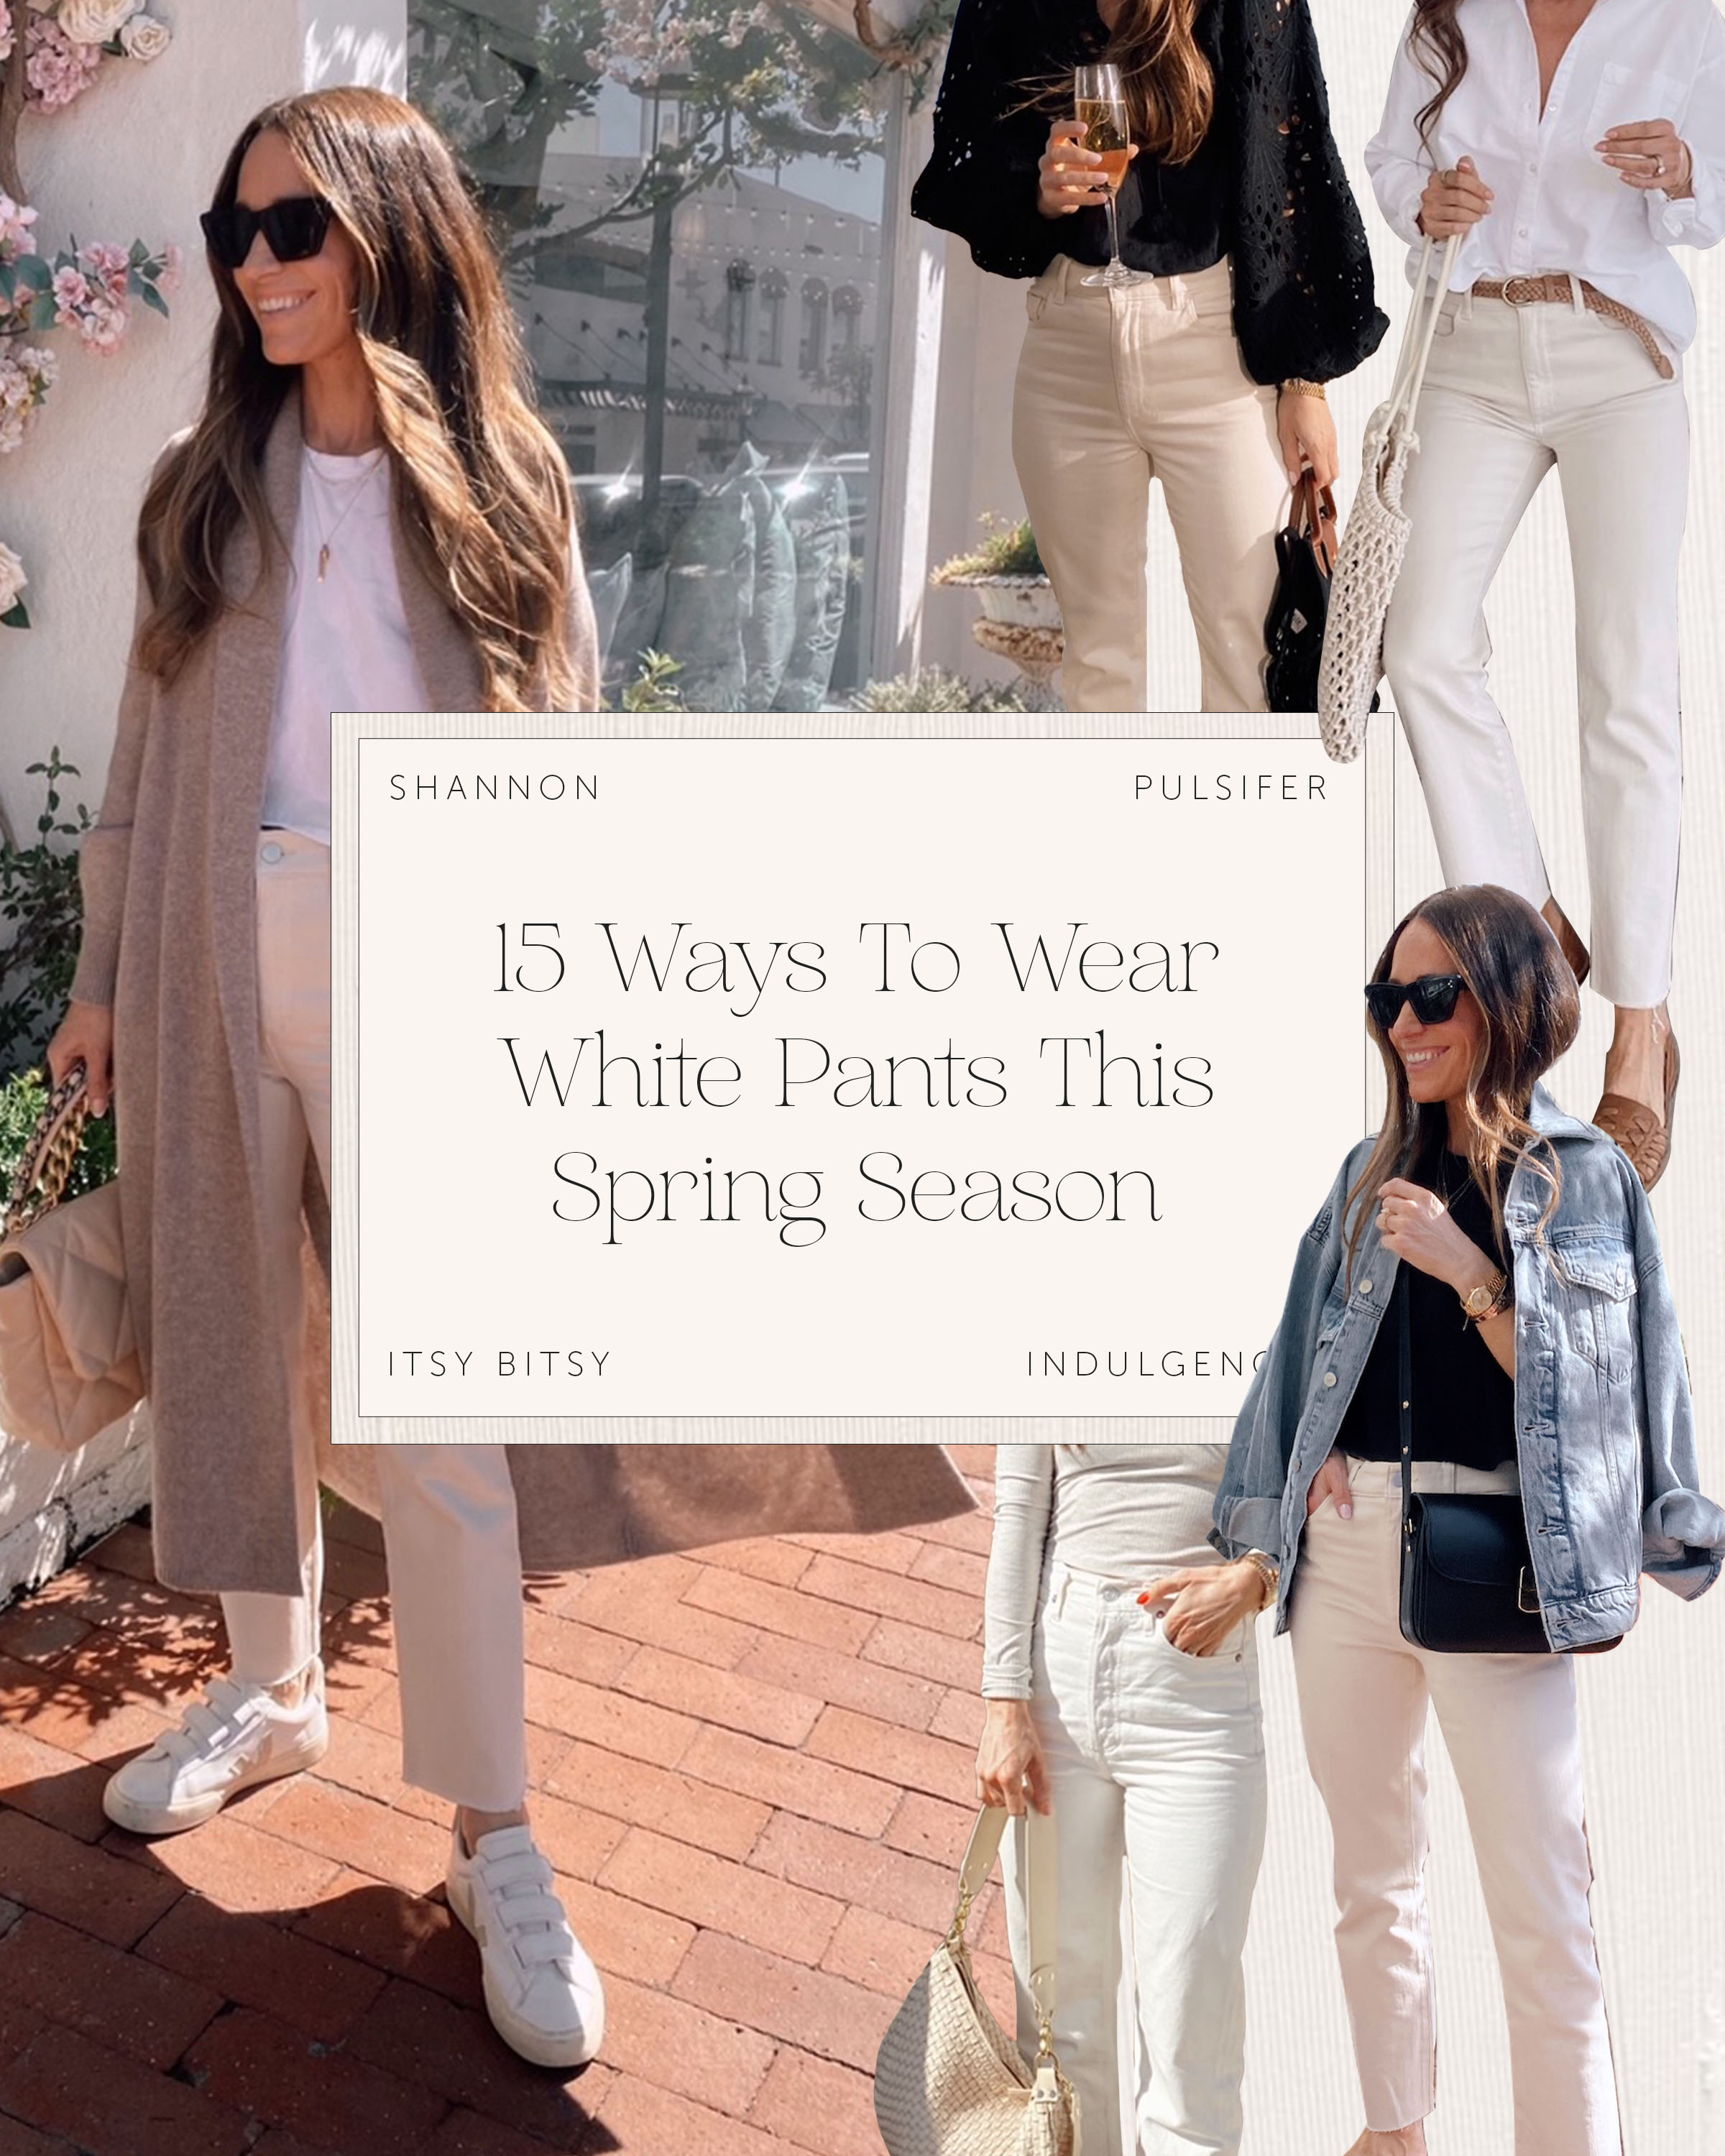 White Sweatpants Spring Outfits For Women (10 ideas & outfits)